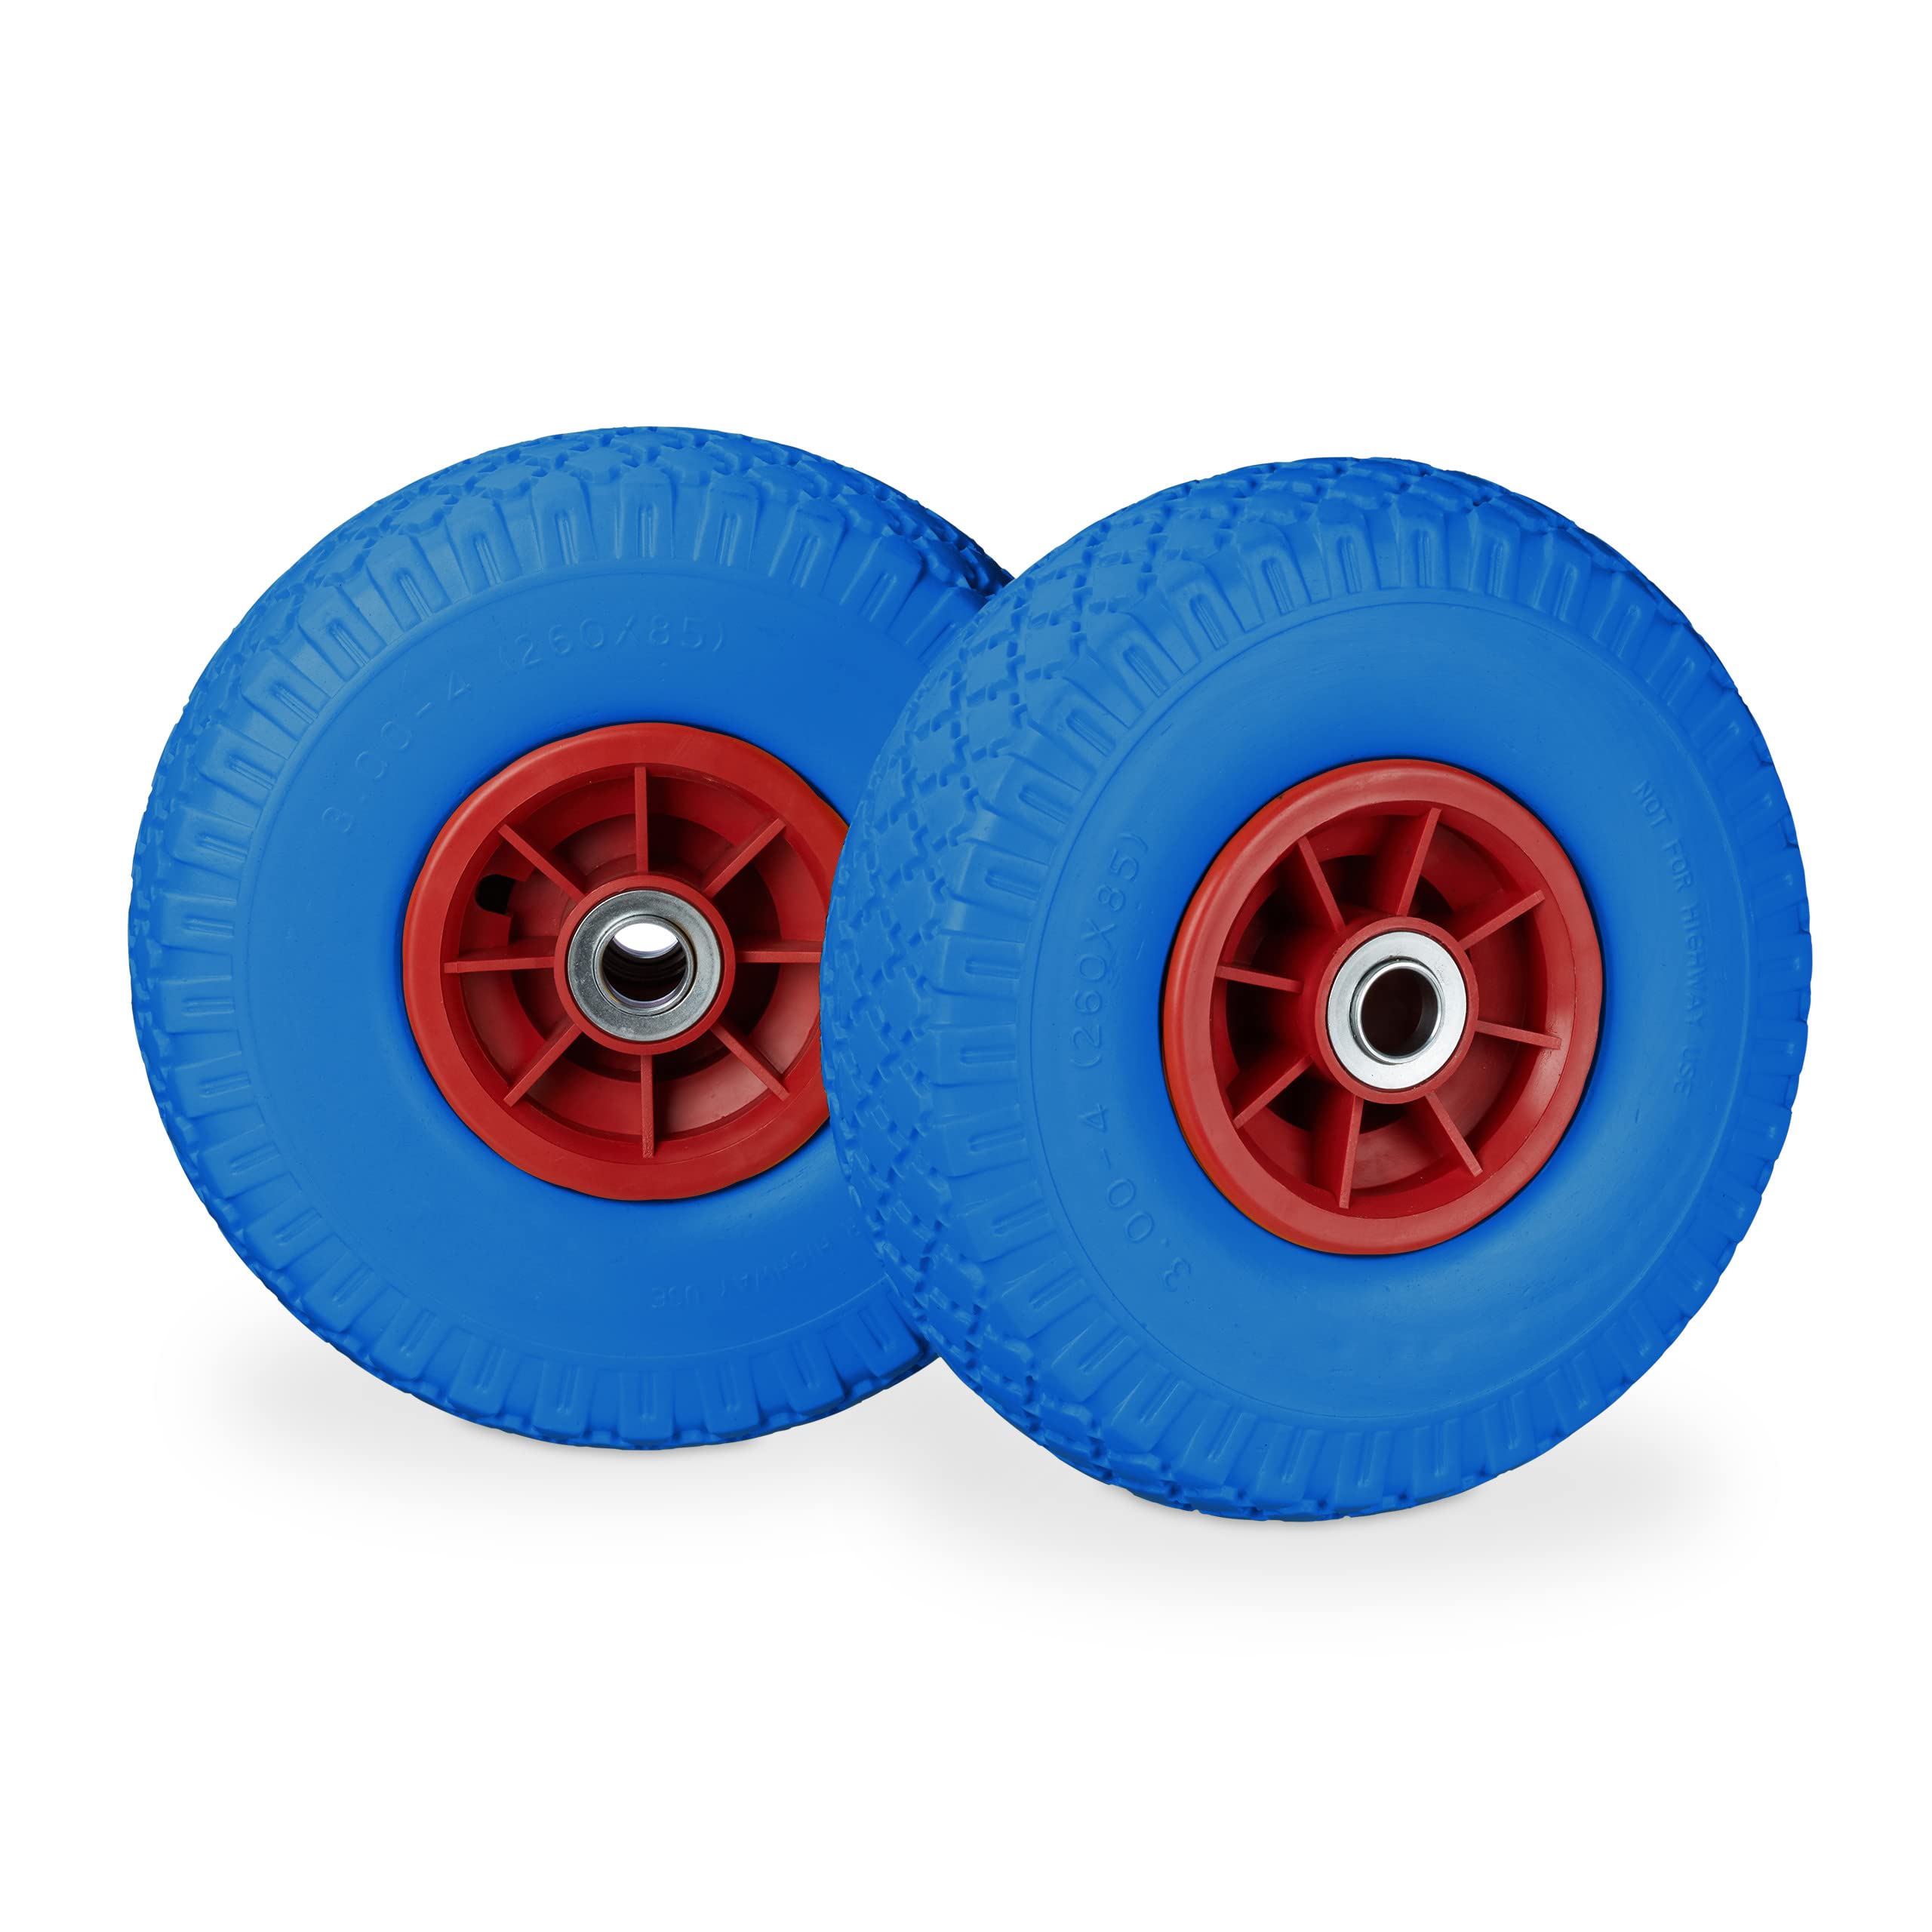 Relaxdays 2 x Hand Truck Tyre, Non-Flat Solid Rubber Wheels, 3.00-4, 20mm Axle, 80 kg, 260 x 85 mm, Blue/Red, Pack of 1, Multico